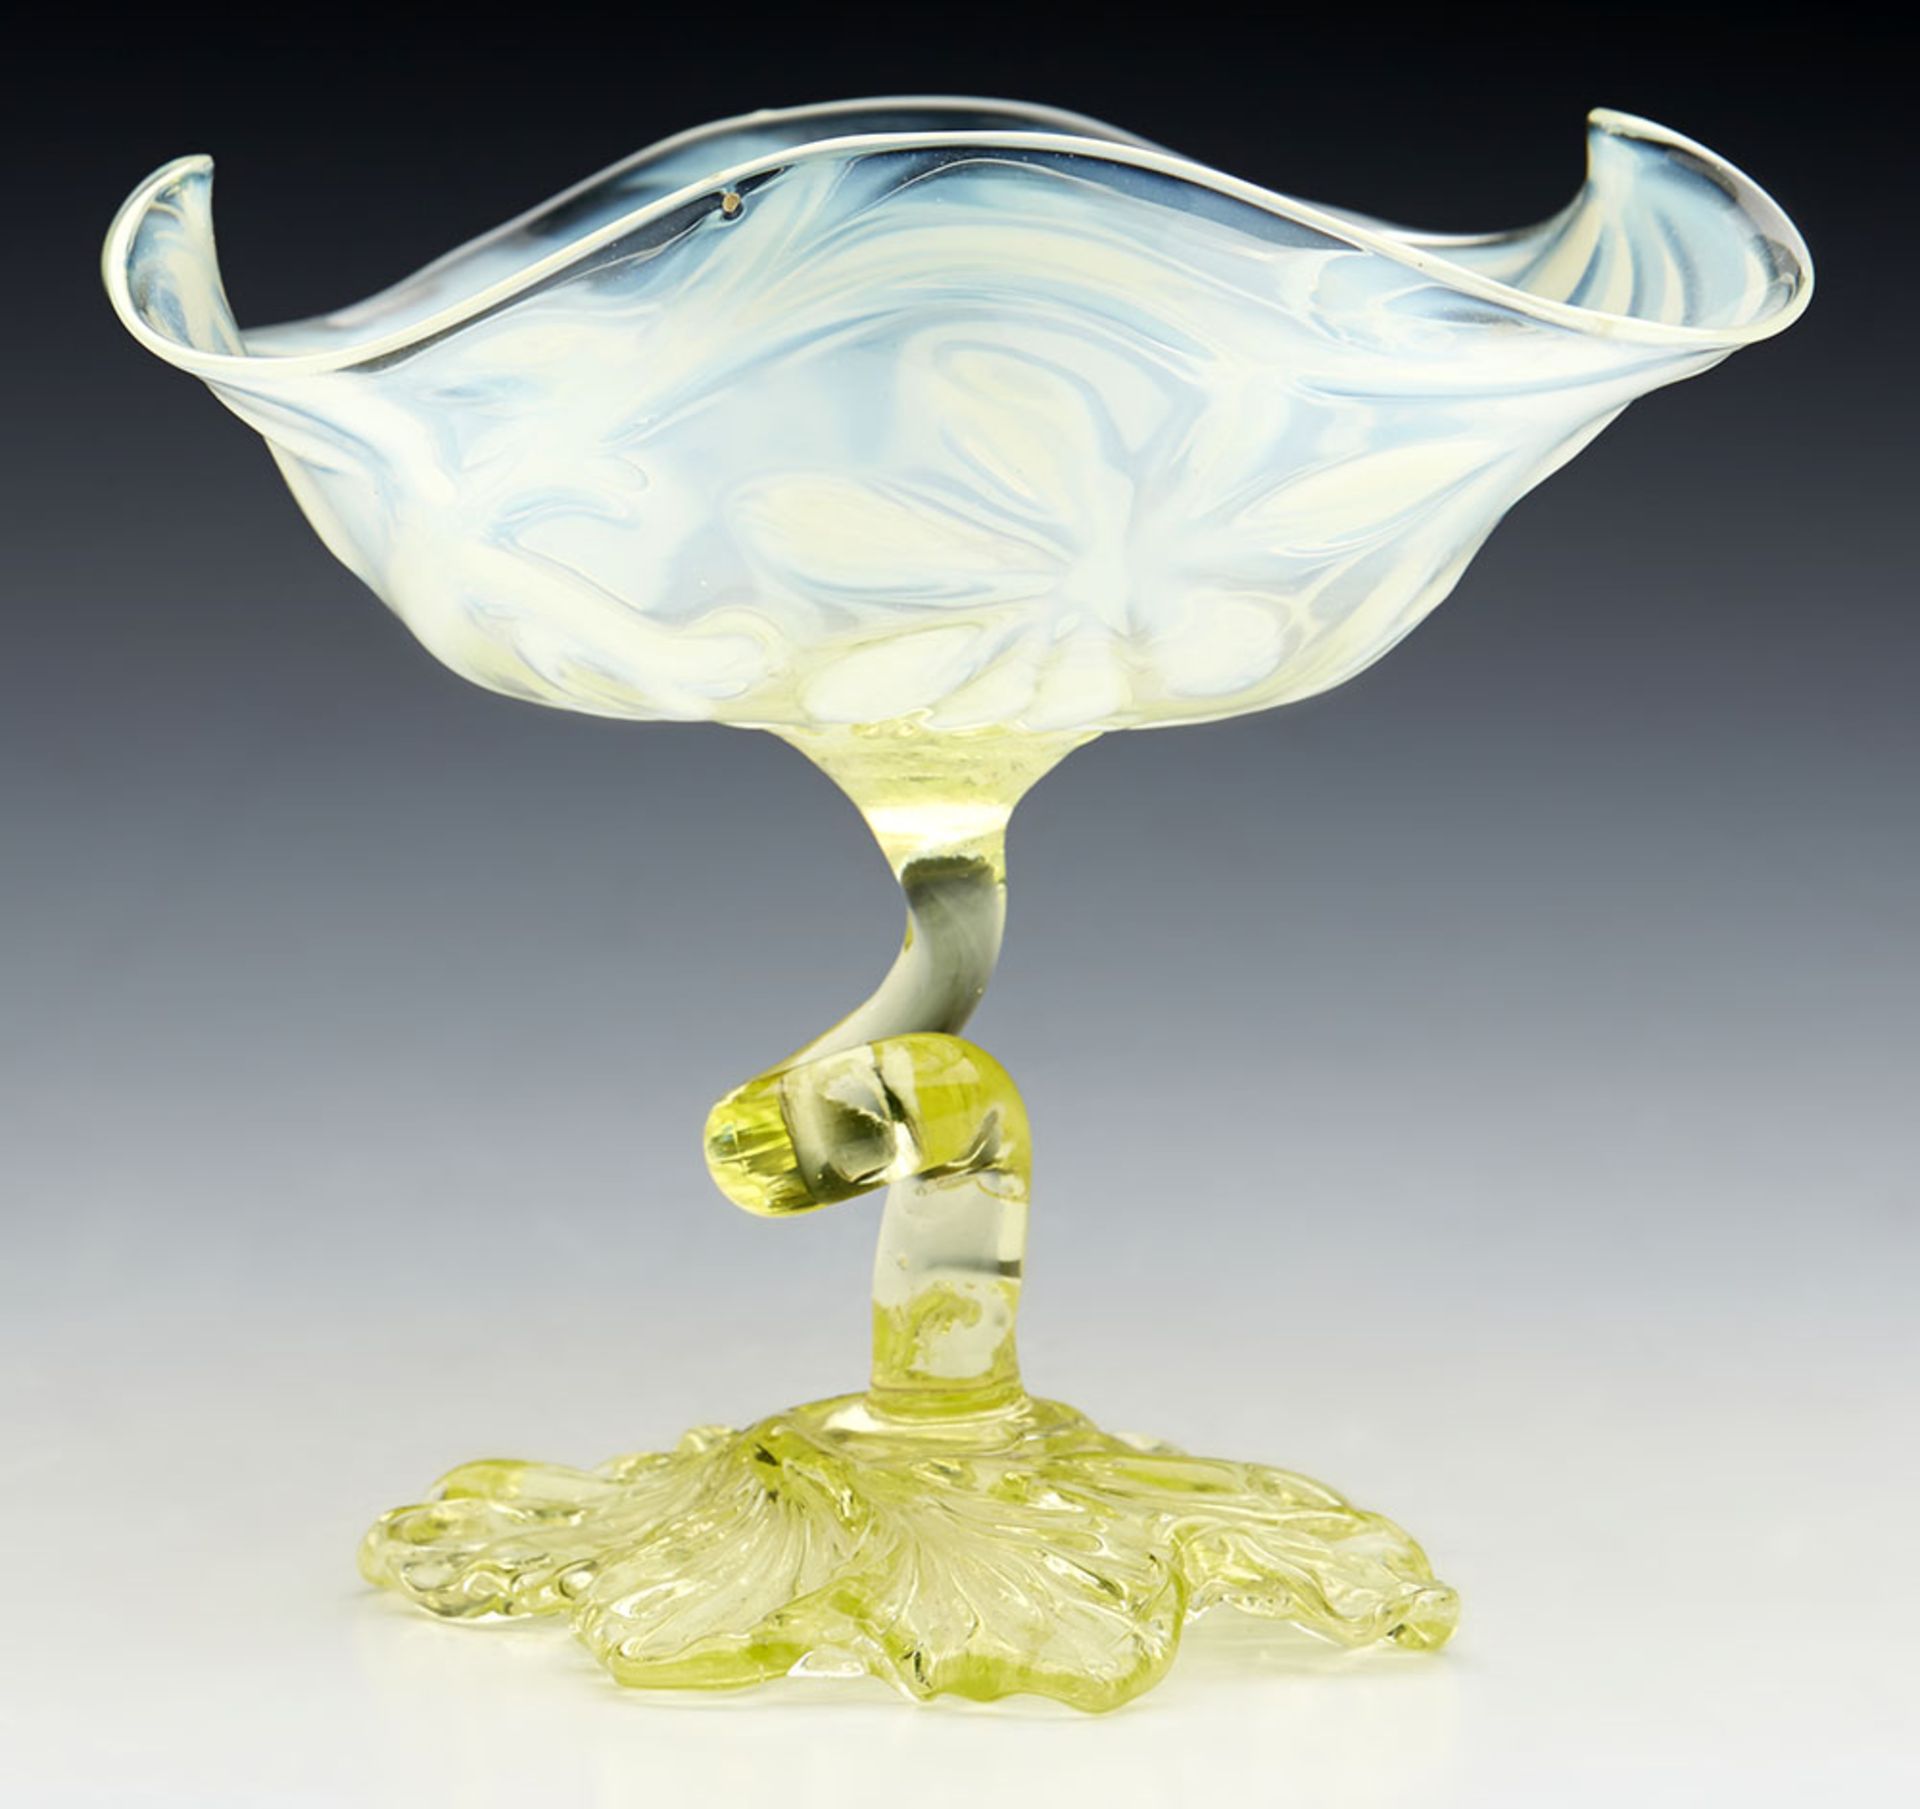 Antique English Yellow Vaseline Glass Stem Dish With Floral Designs C.1890 - Image 9 of 9